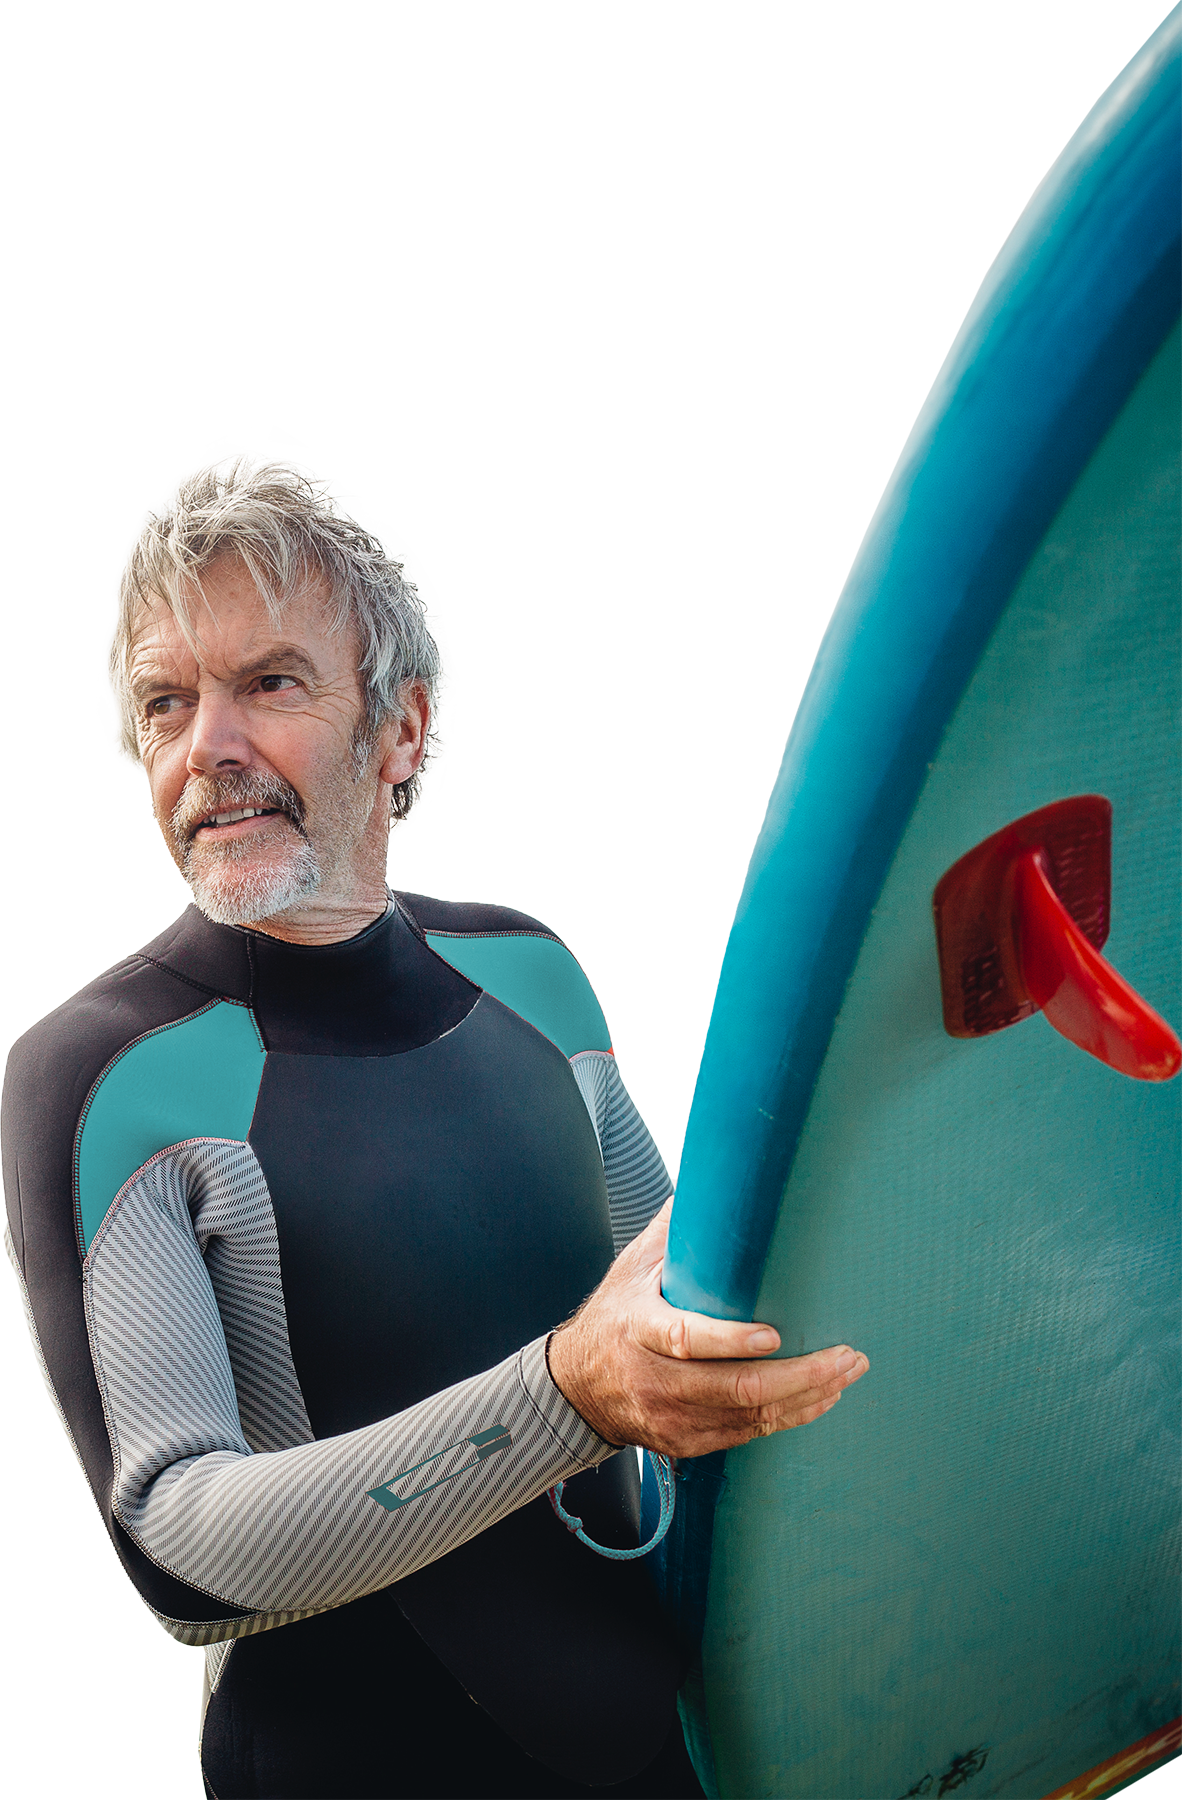 Older man with grey hair and beard in a wetsuit holding a blue surfboard to his left side